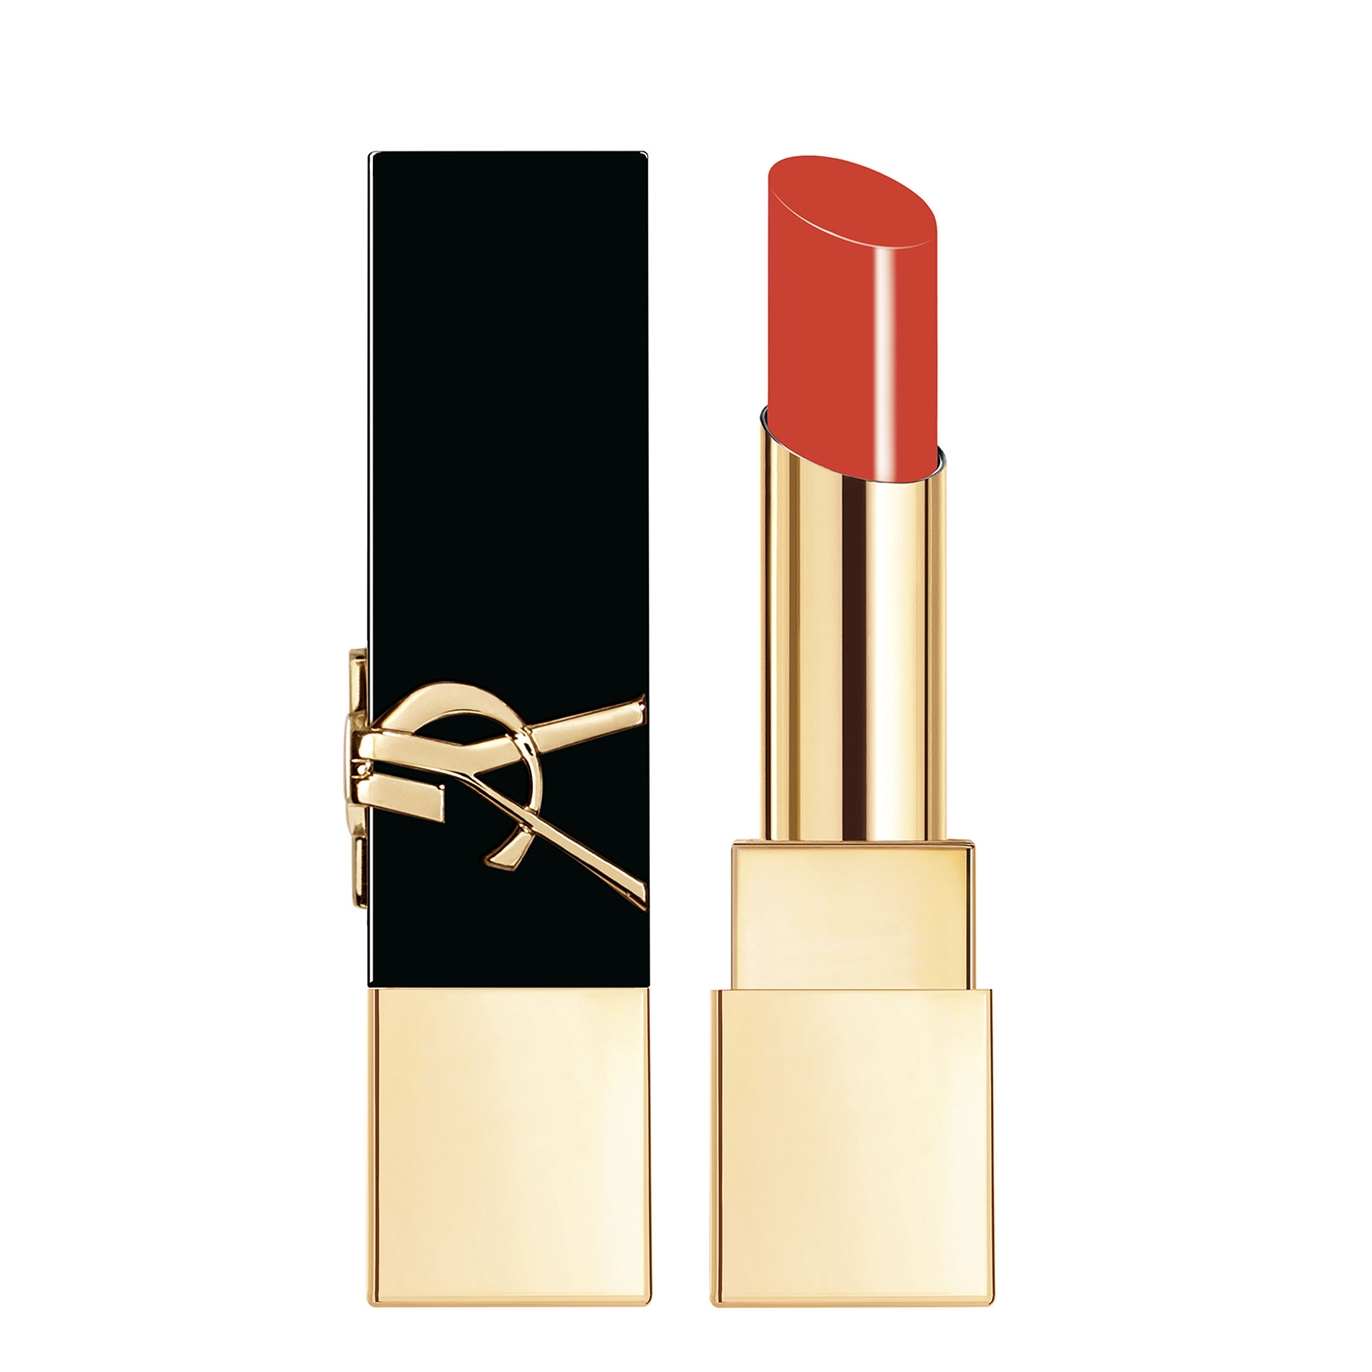 Yves Saint Laurent The Bold Lipstick - 07 Unhibited Flame